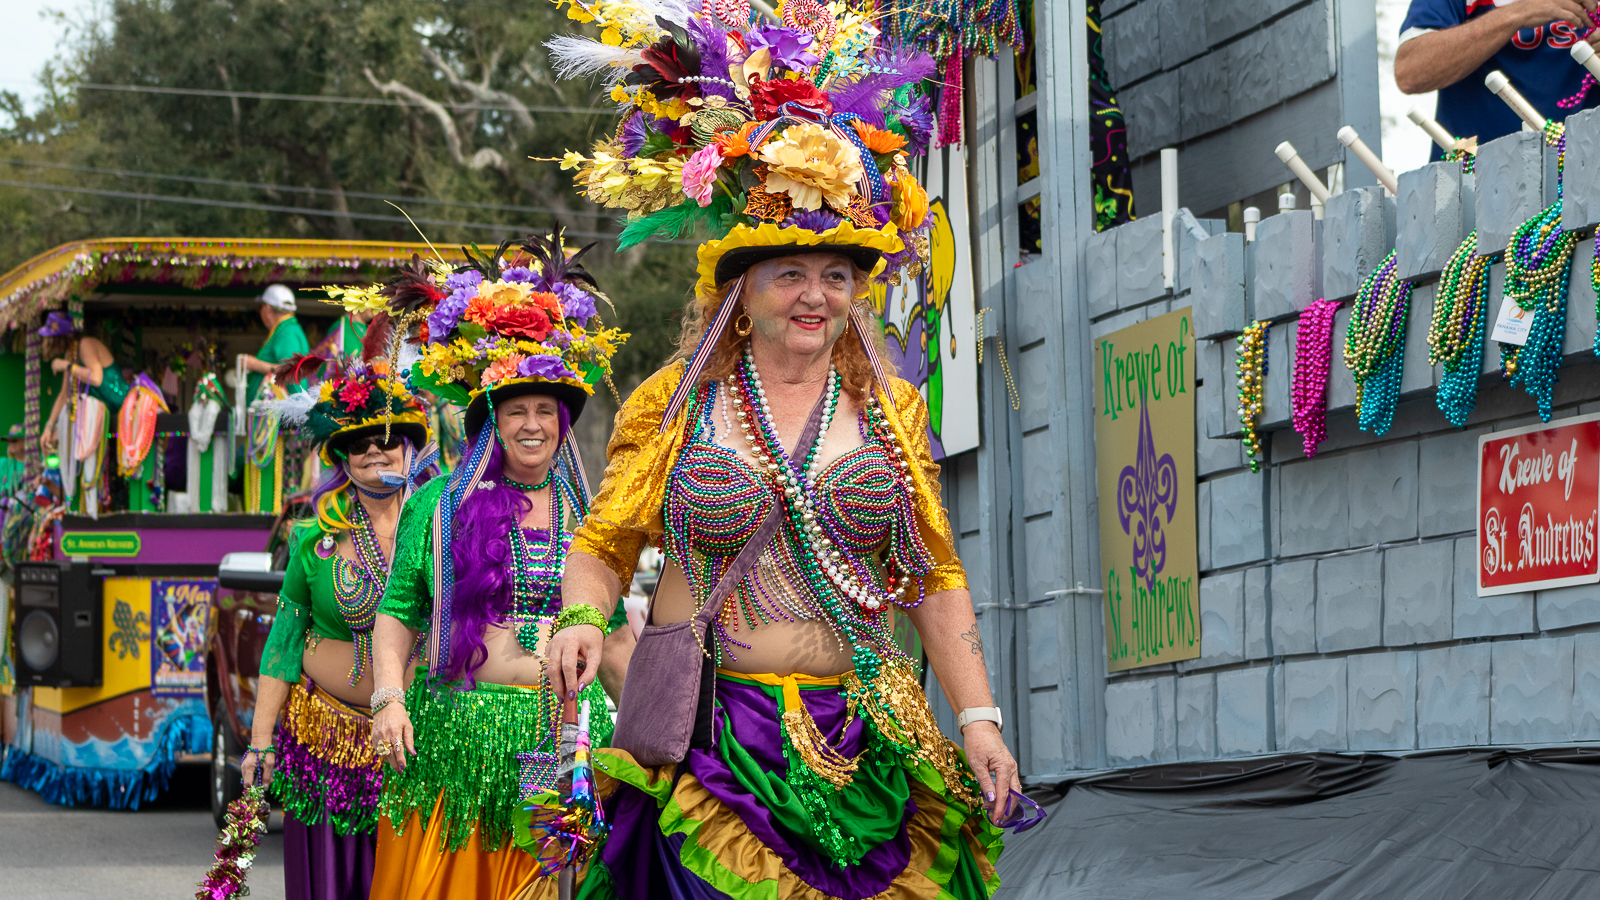 Part 6 25th Annual St. Andrews Mardi Gras on Saturday, February 3